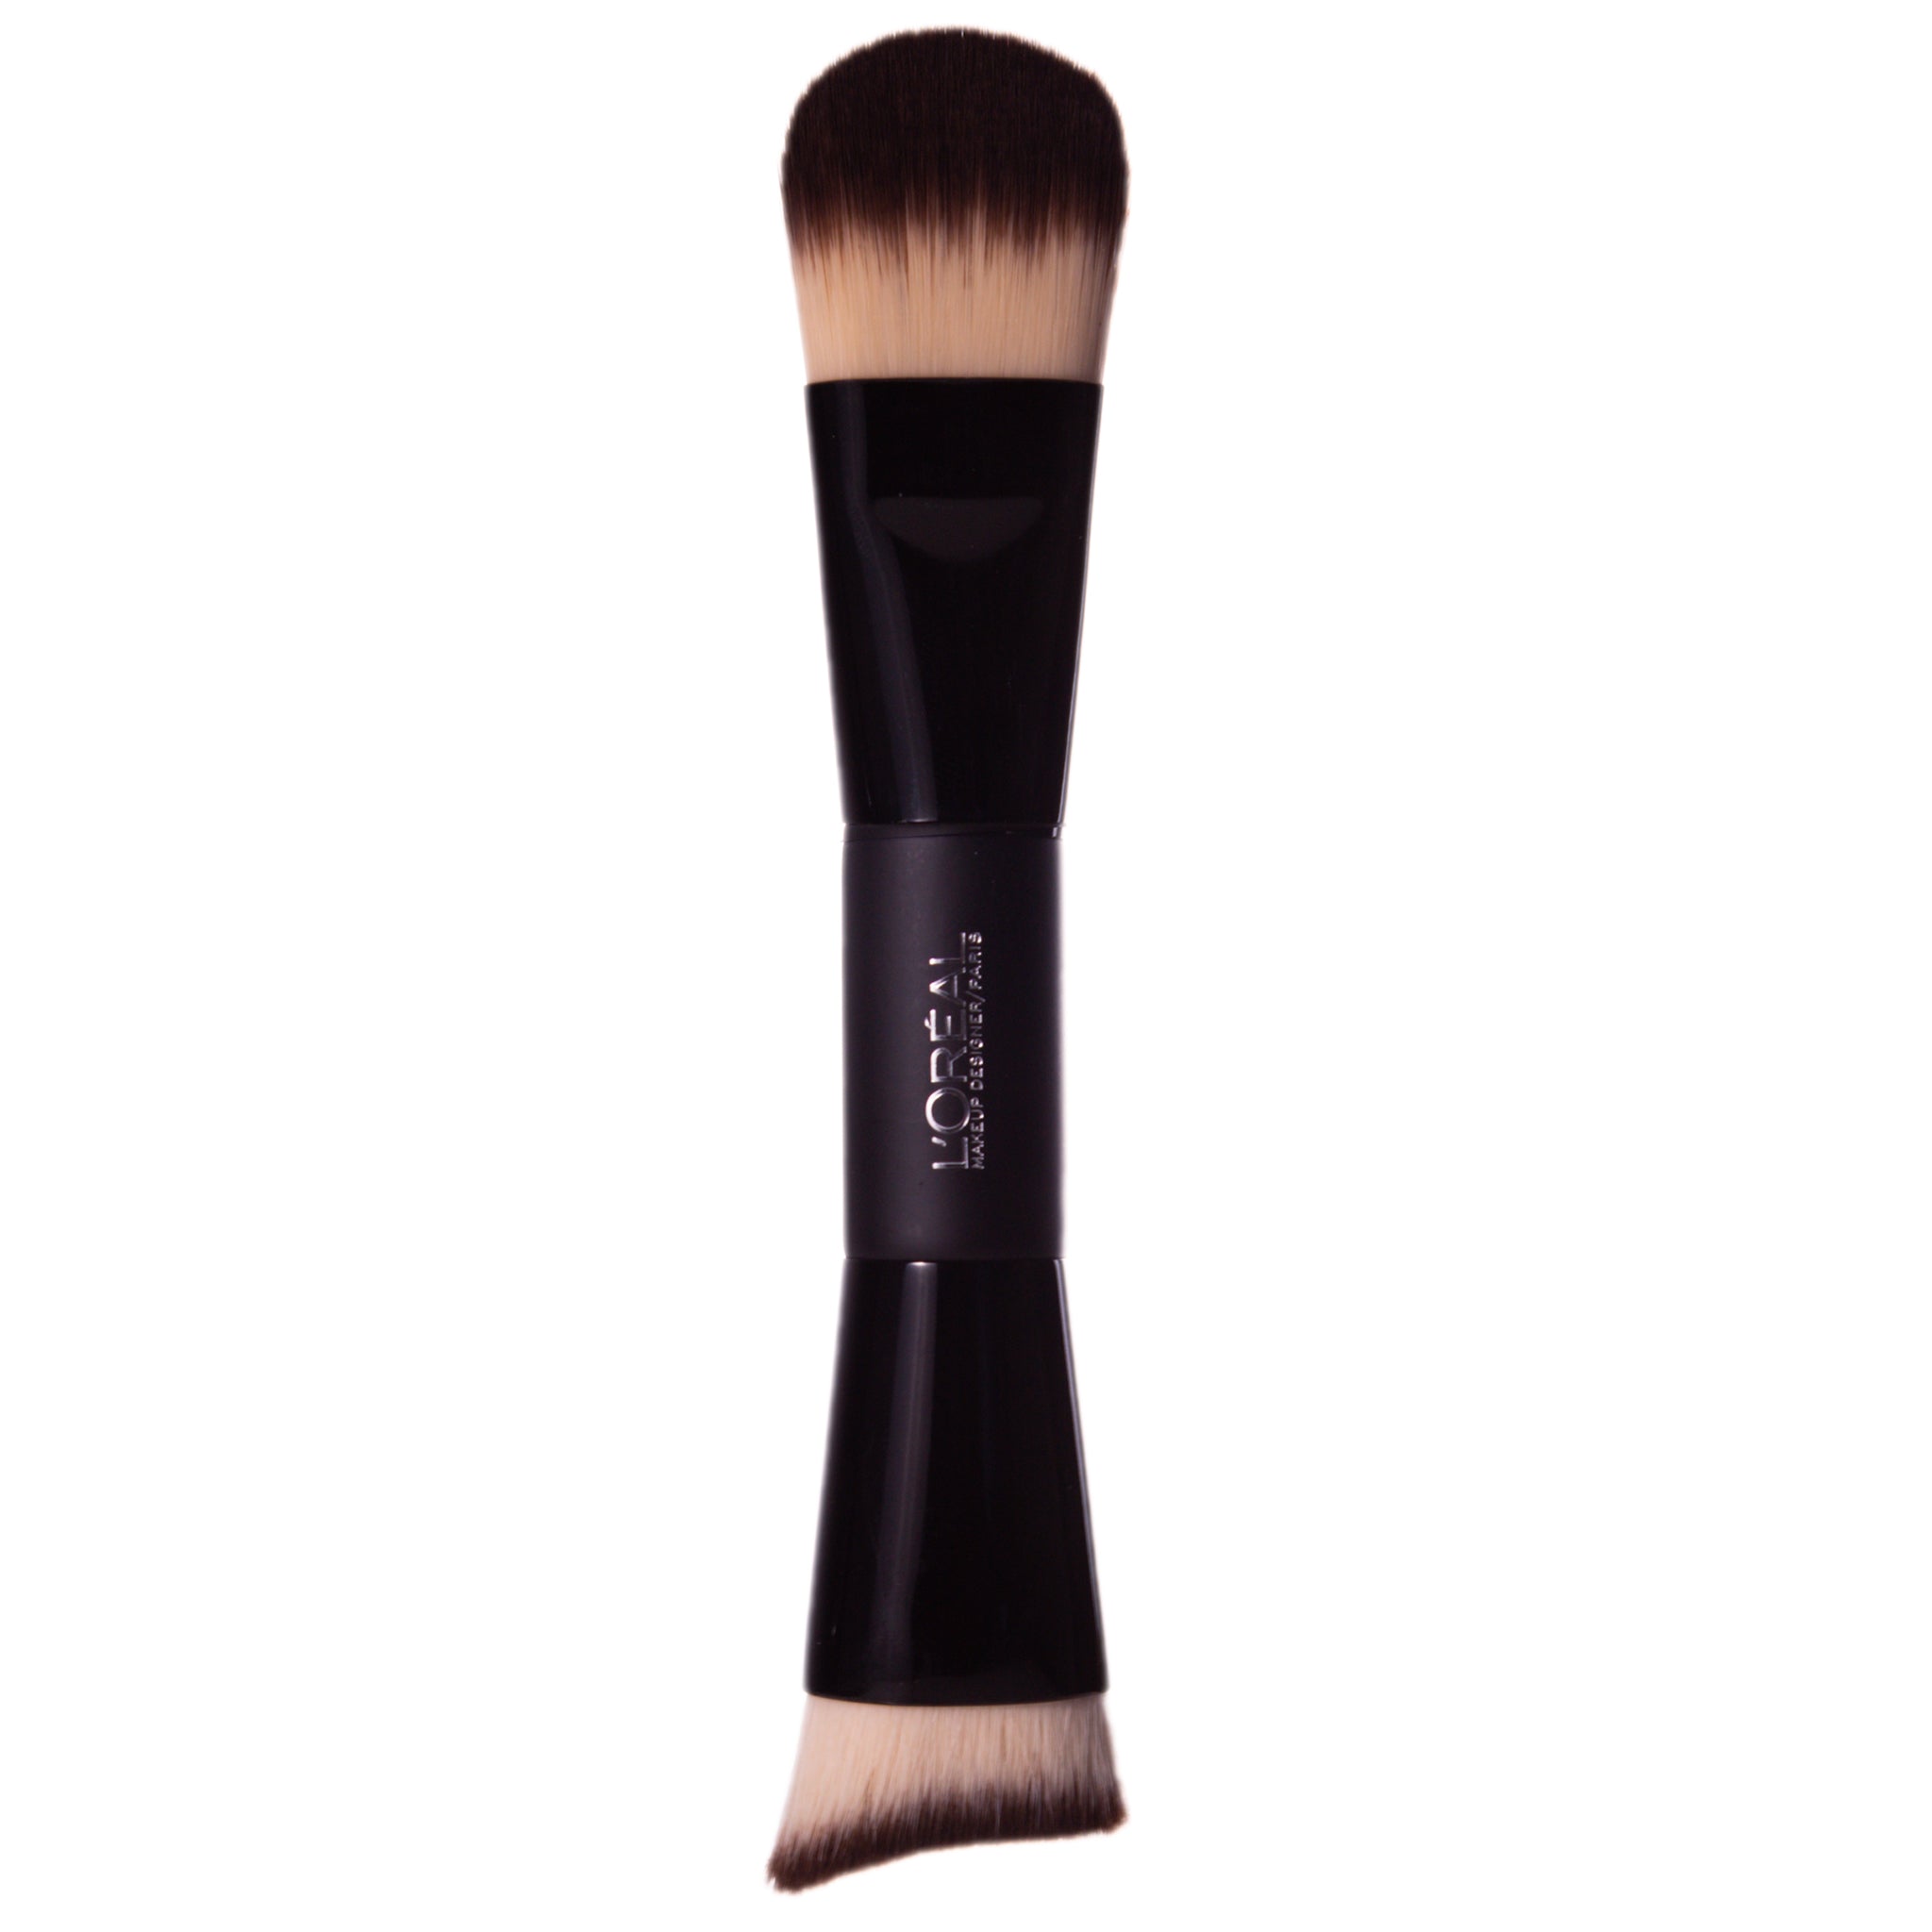 L'Oreal Infallible Face Sculptor Brush